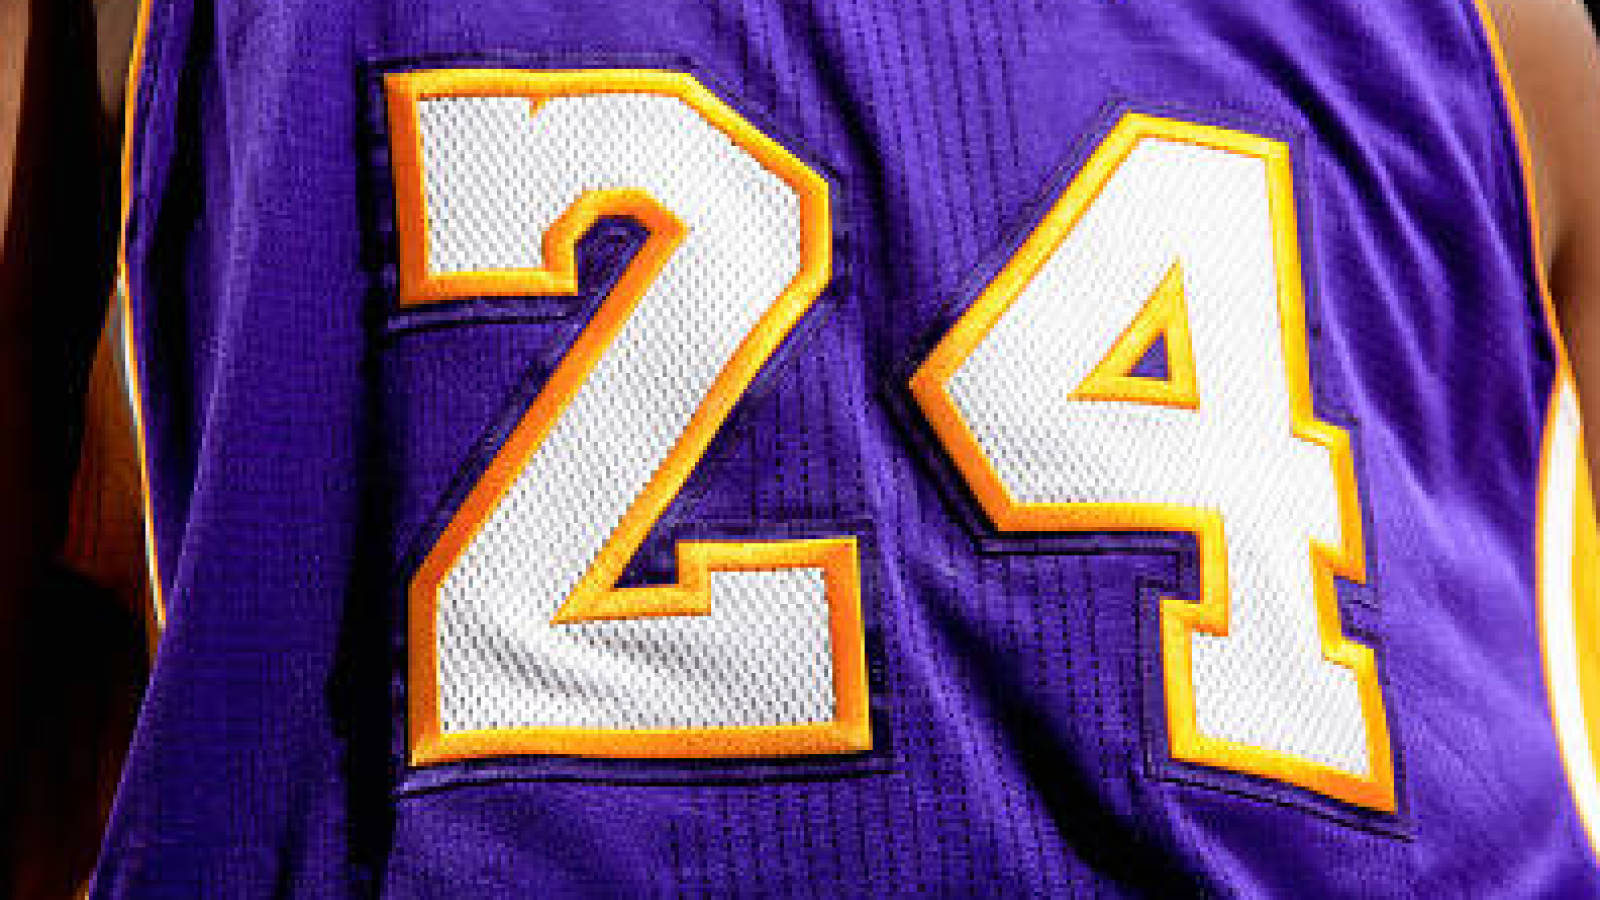 lakers retired jersey numbers